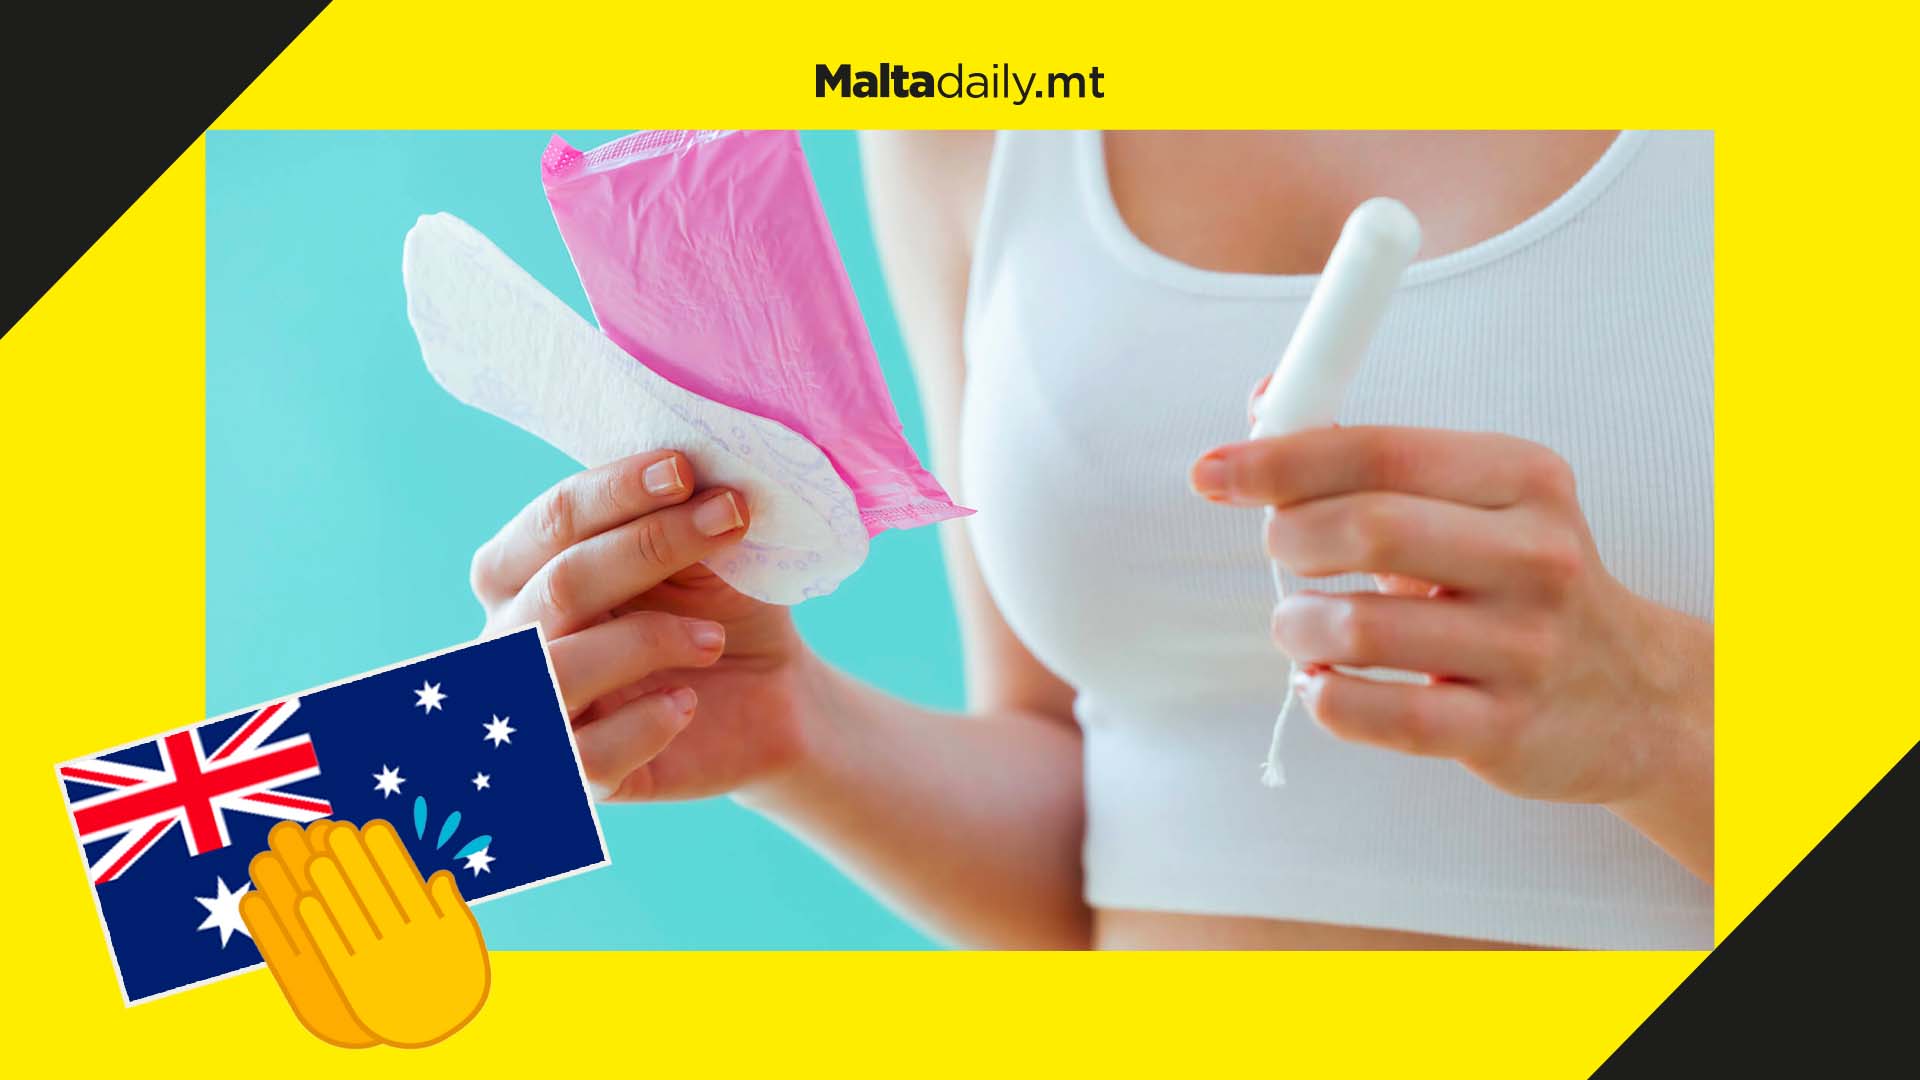 Australia to give students free access to pads and tampons on campus